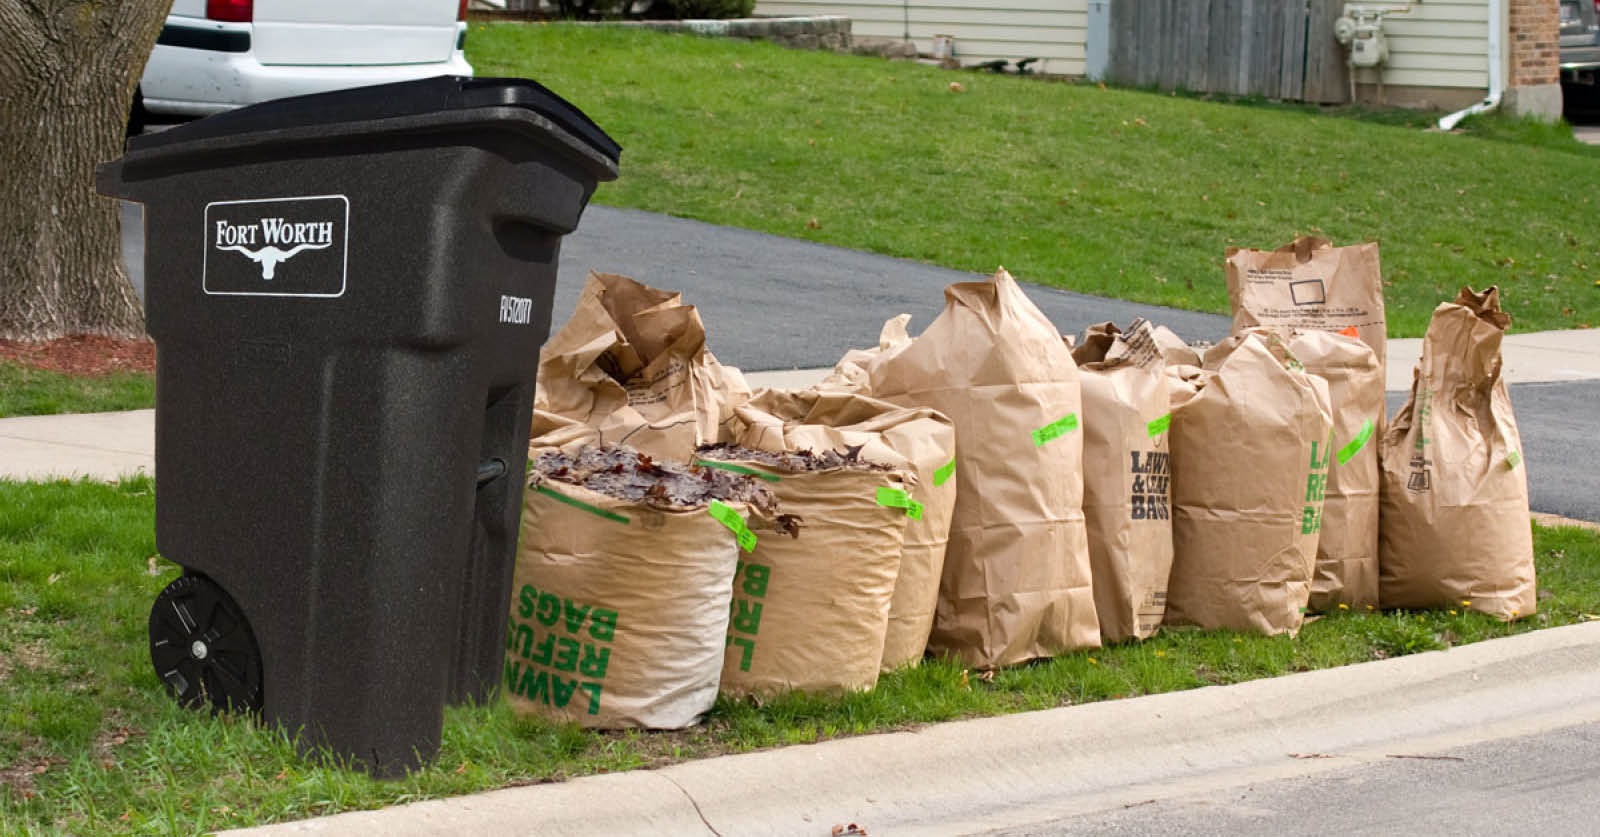 https://www.fortworthtexas.gov/files/assets/public/v/1/environmental-services/solid-waste/images/yard-trimmings-bags-2.jpg?w=1600&h=837